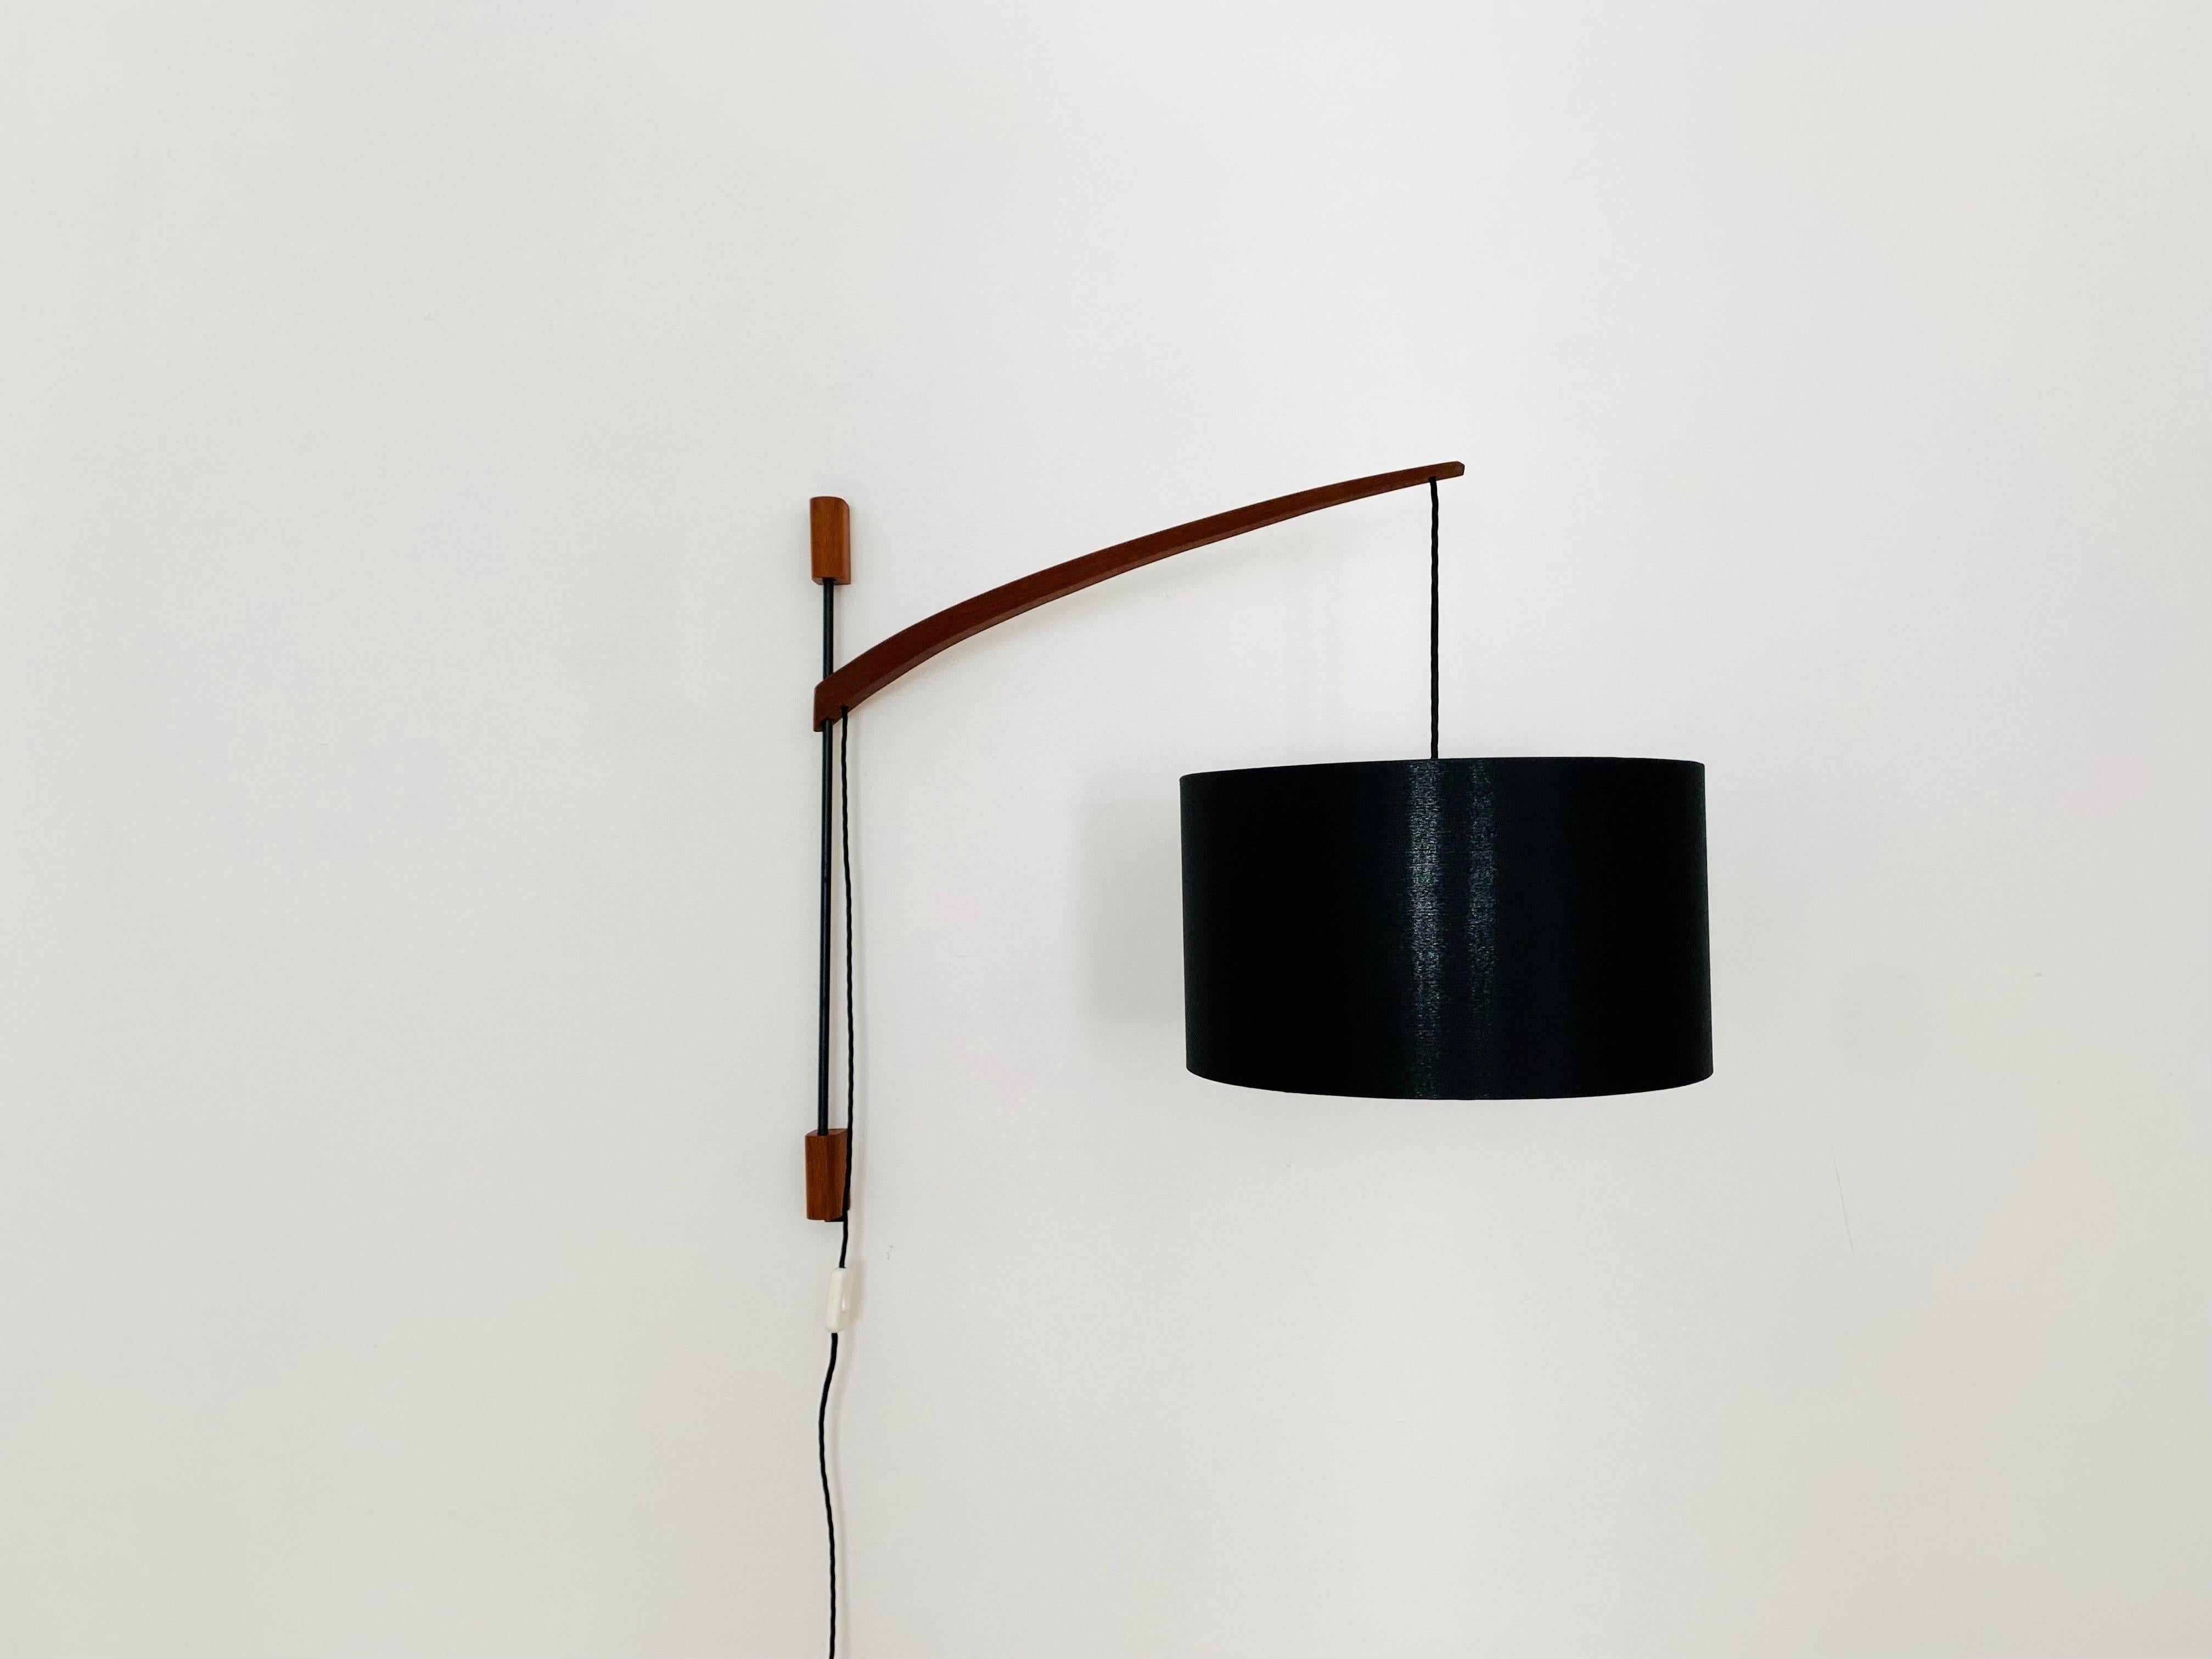 Wonderful adjustable arc wall lamp from the 1960s.
Great and exceptionally minimalistic design with a fantastically elegant look.
Very nice swiveling teak arm.
The lampshade creates a spectacular play of light and creates a very cozy